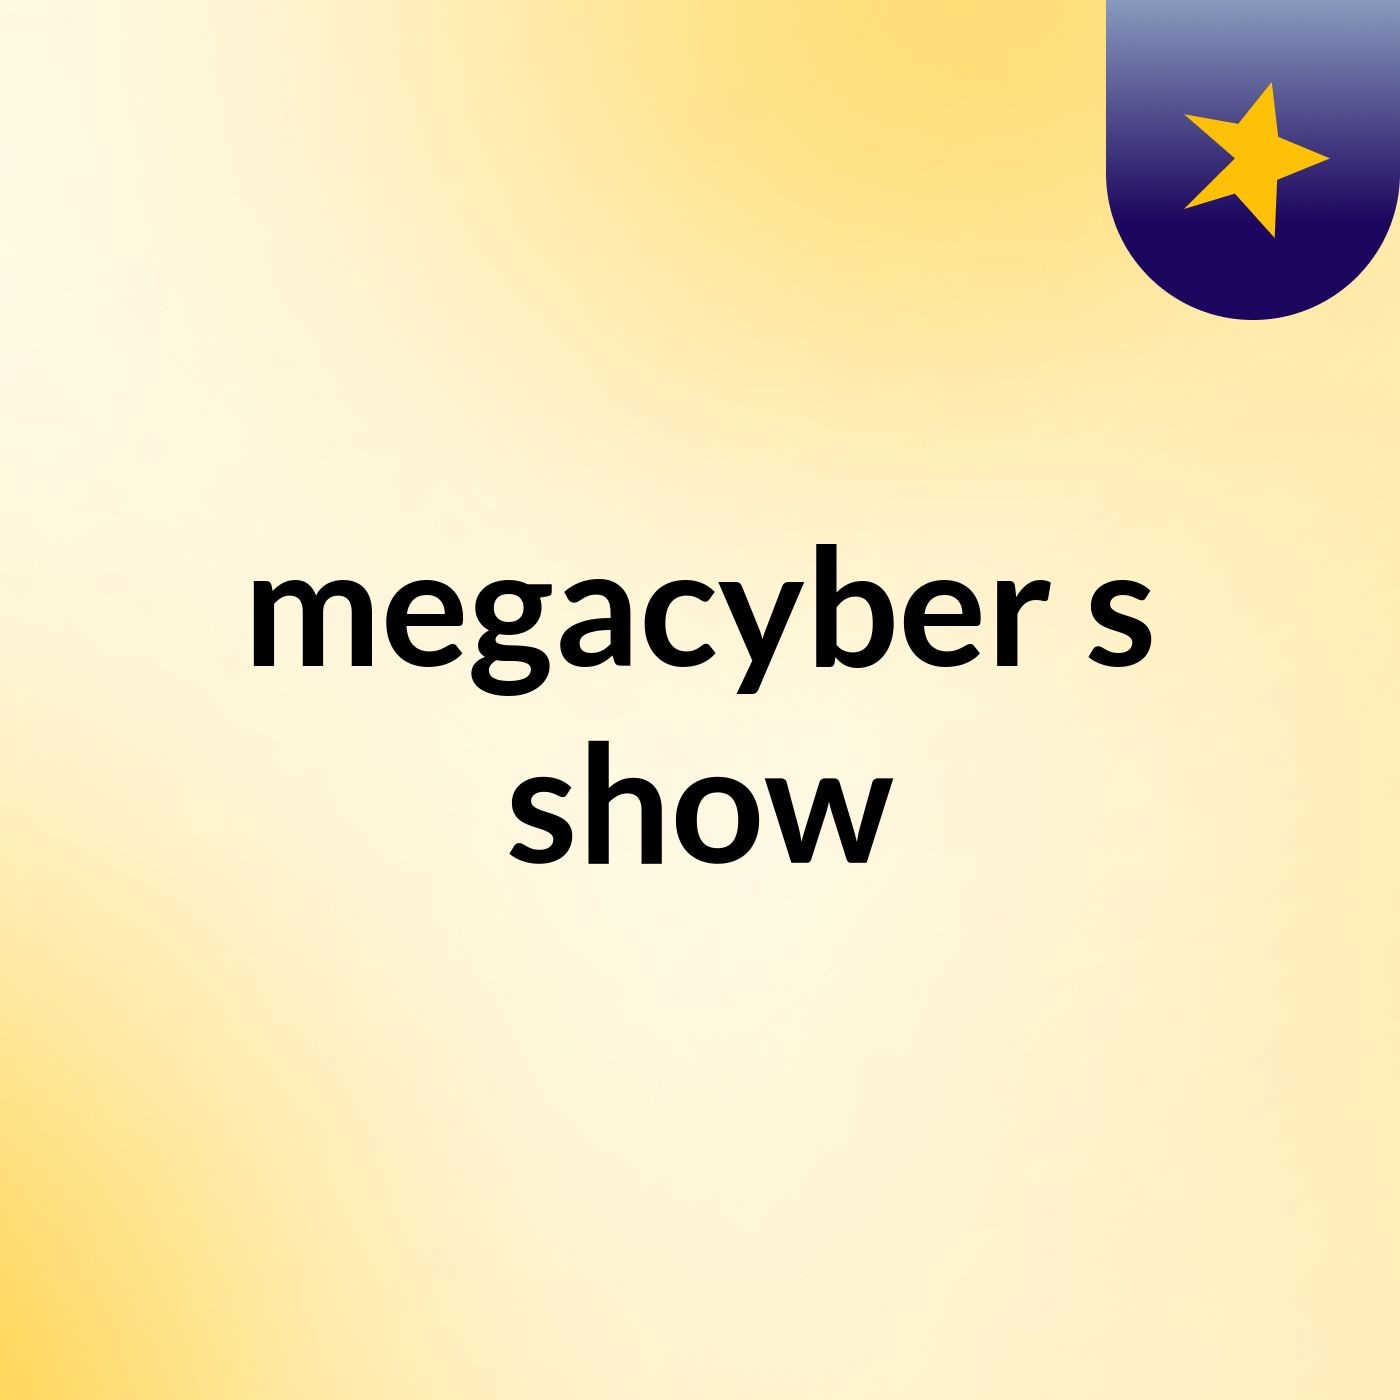 megacyber's show